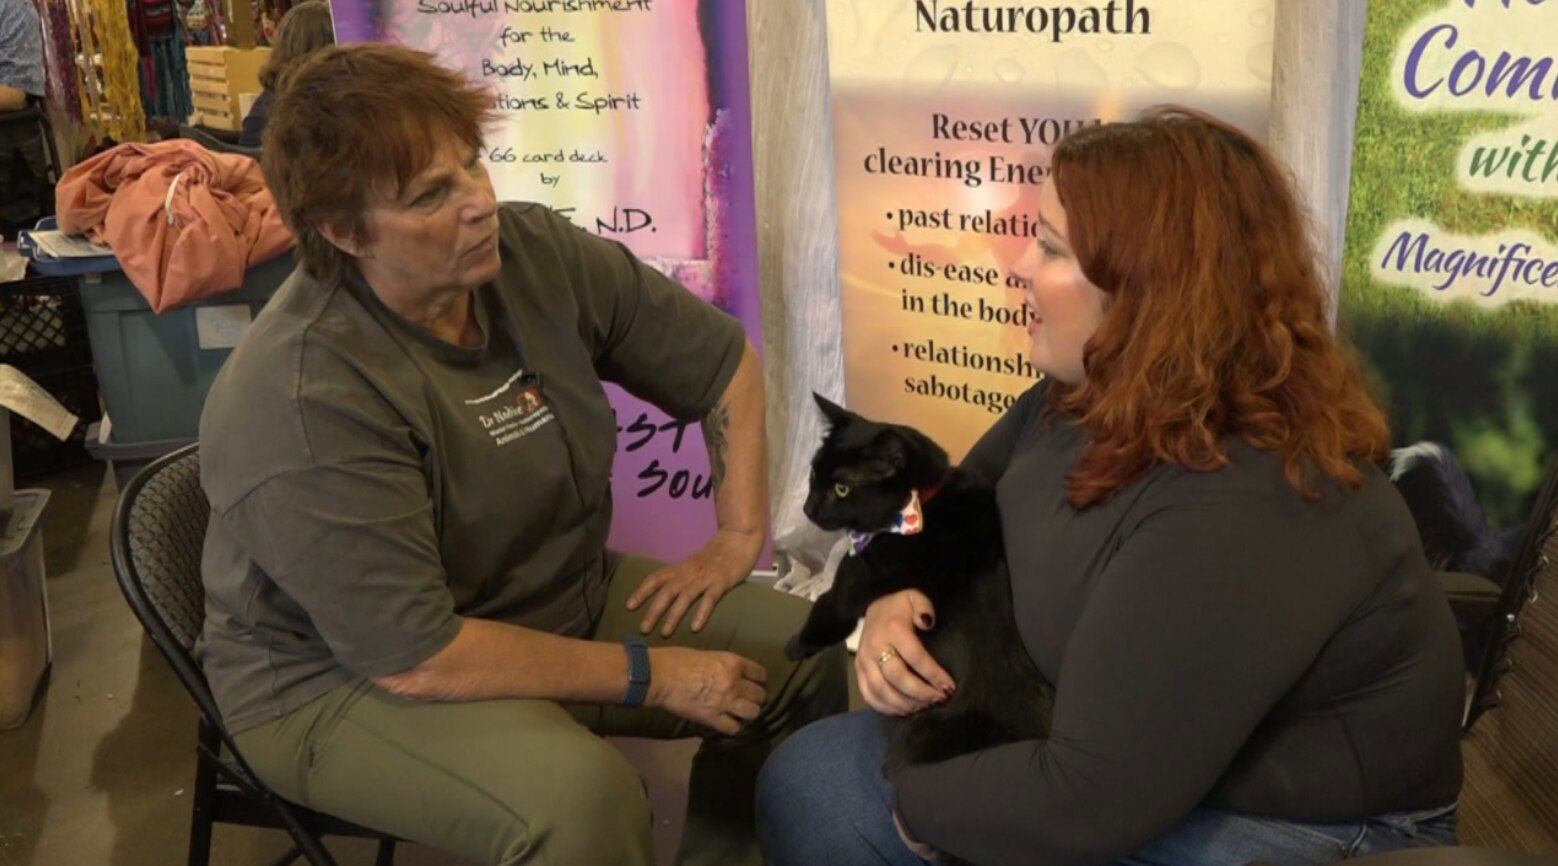 Animal physic provides insight at the Casper Holistic Expo